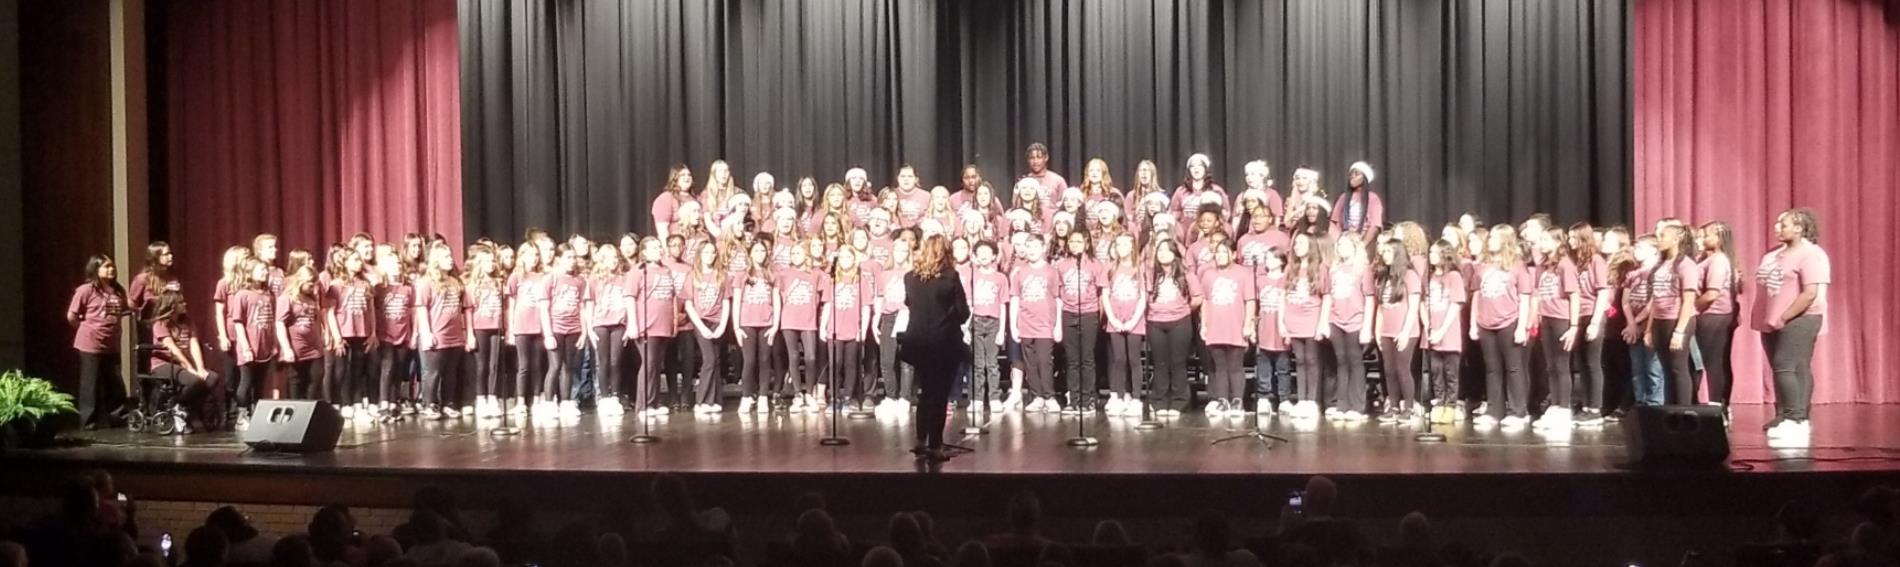 Coffee Middle School Choir at their Christmas Concert